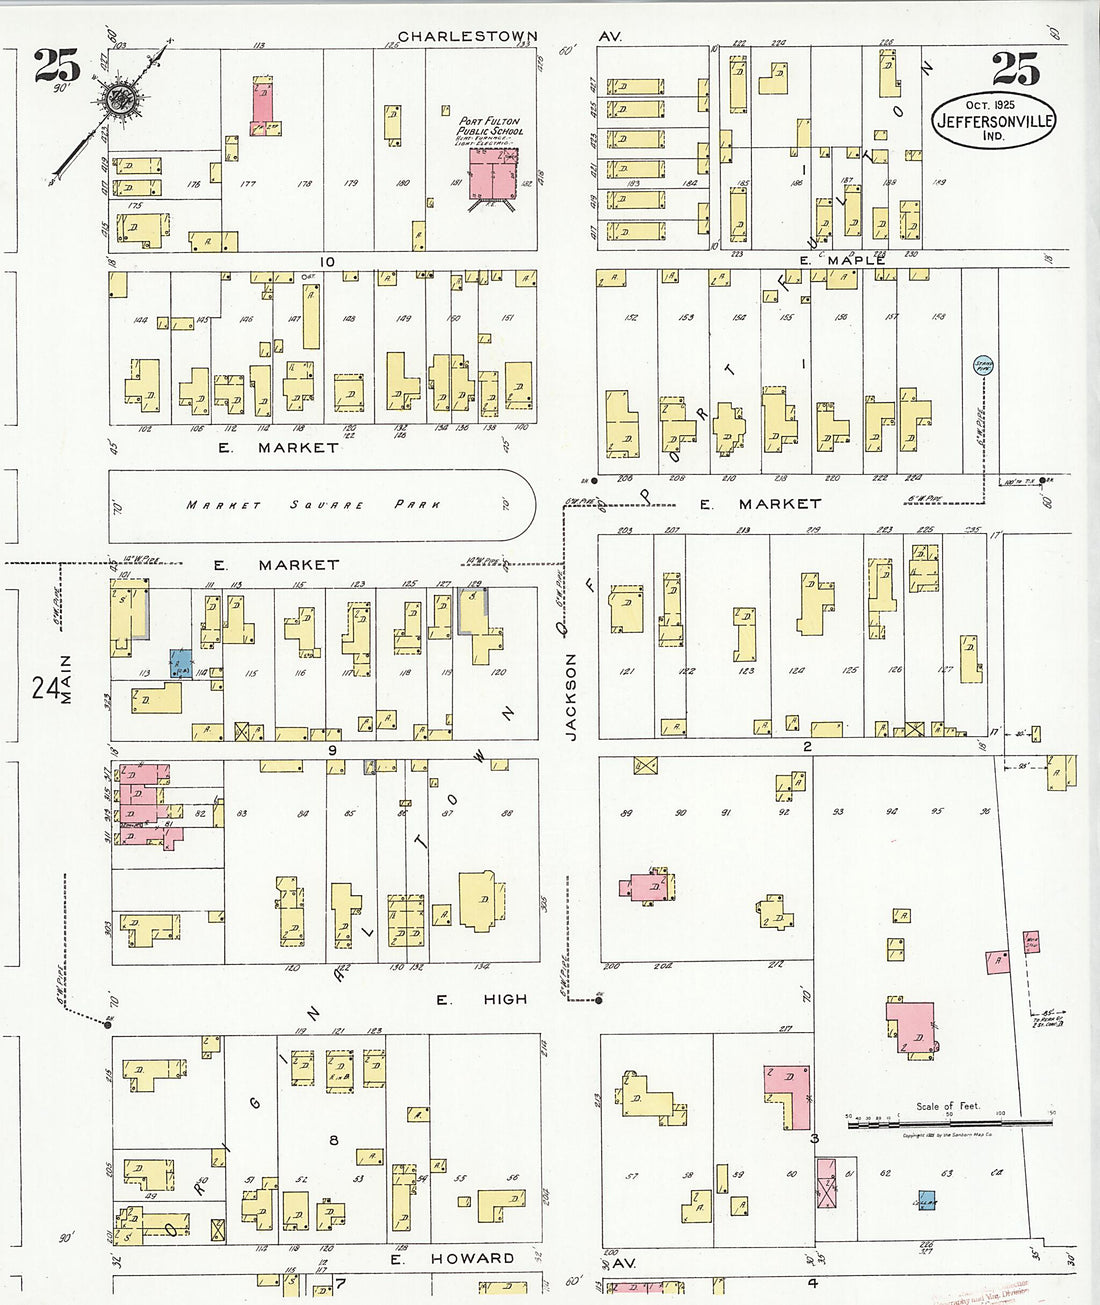 This old map of Speeds, Clark County, Indiana was created by Sanborn Map Company in 1925